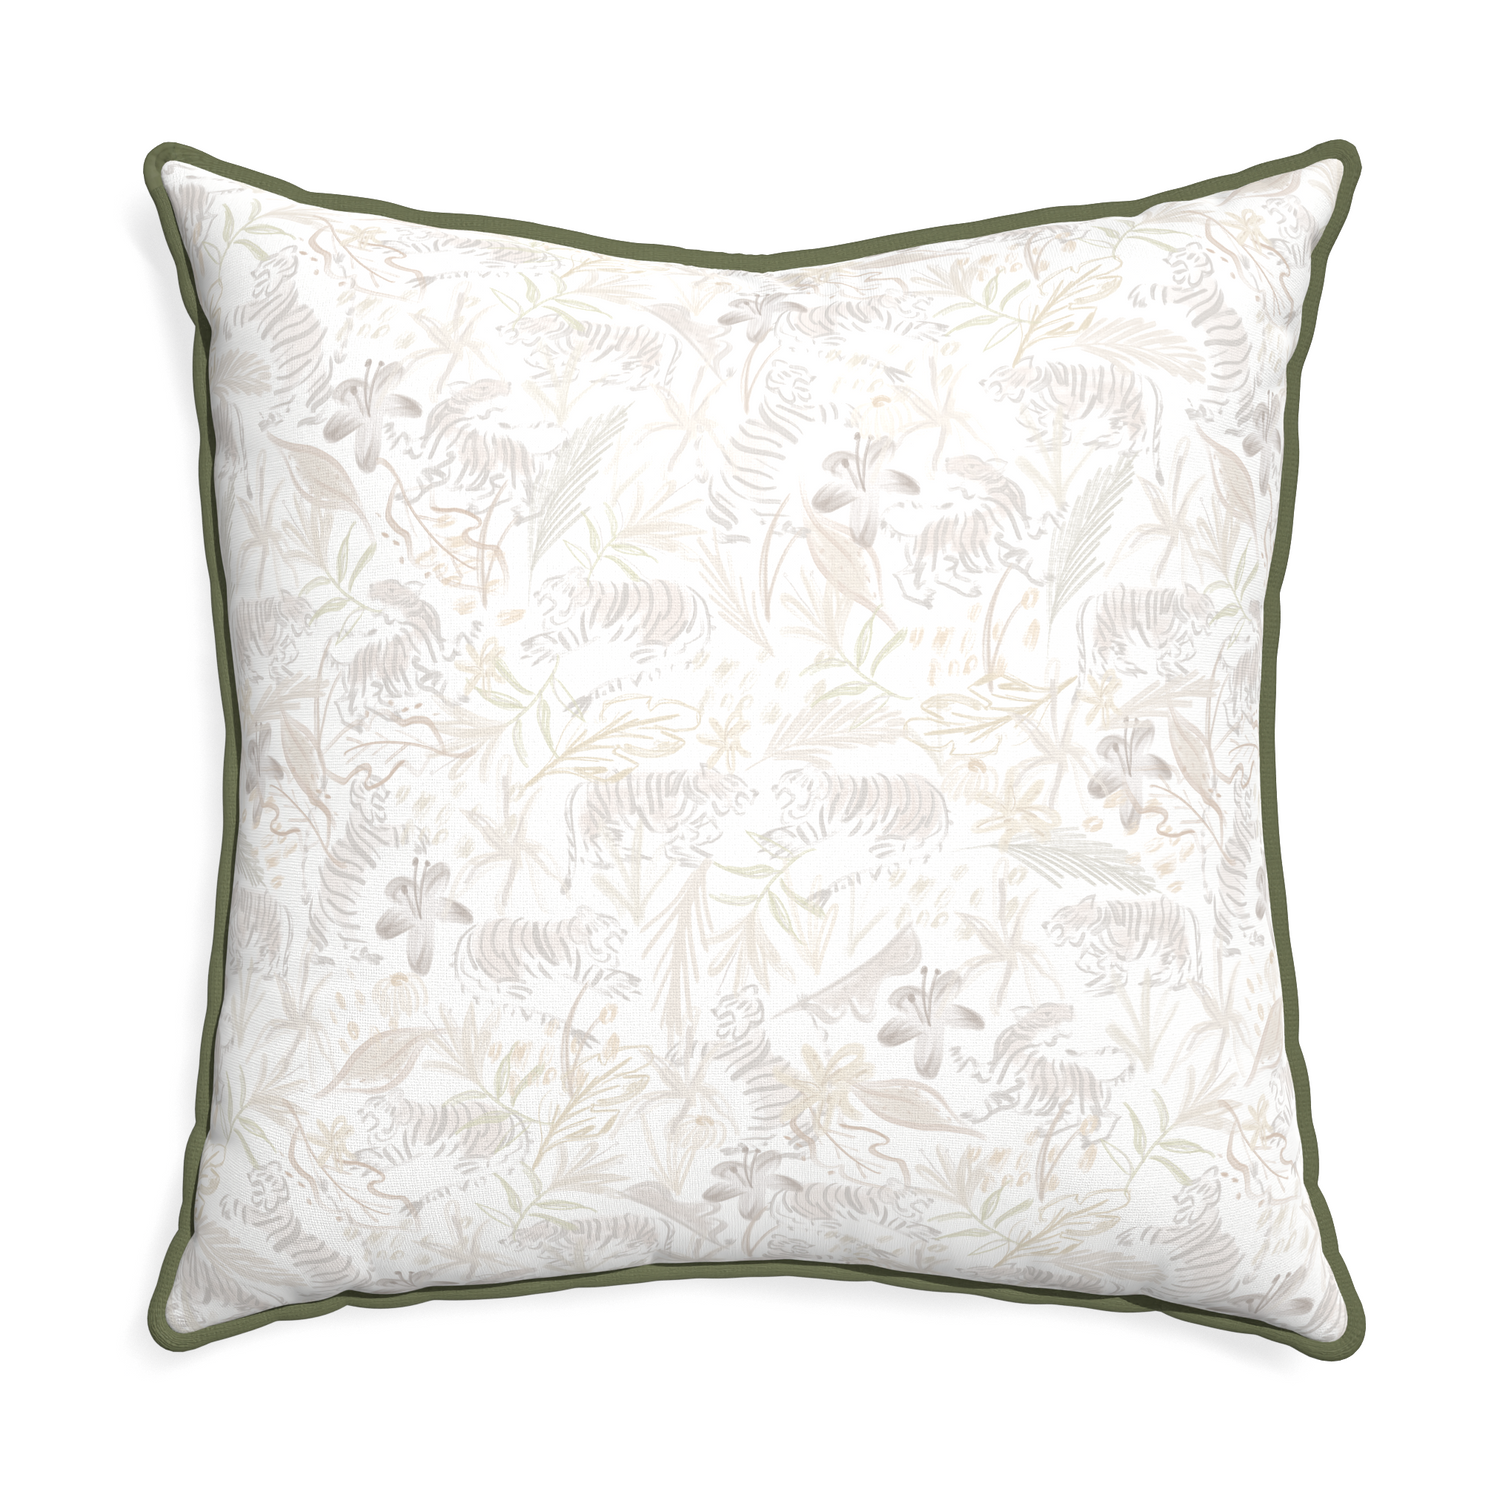 Euro-sham frida sand custom beige chinoiserie tigerpillow with f piping on white background